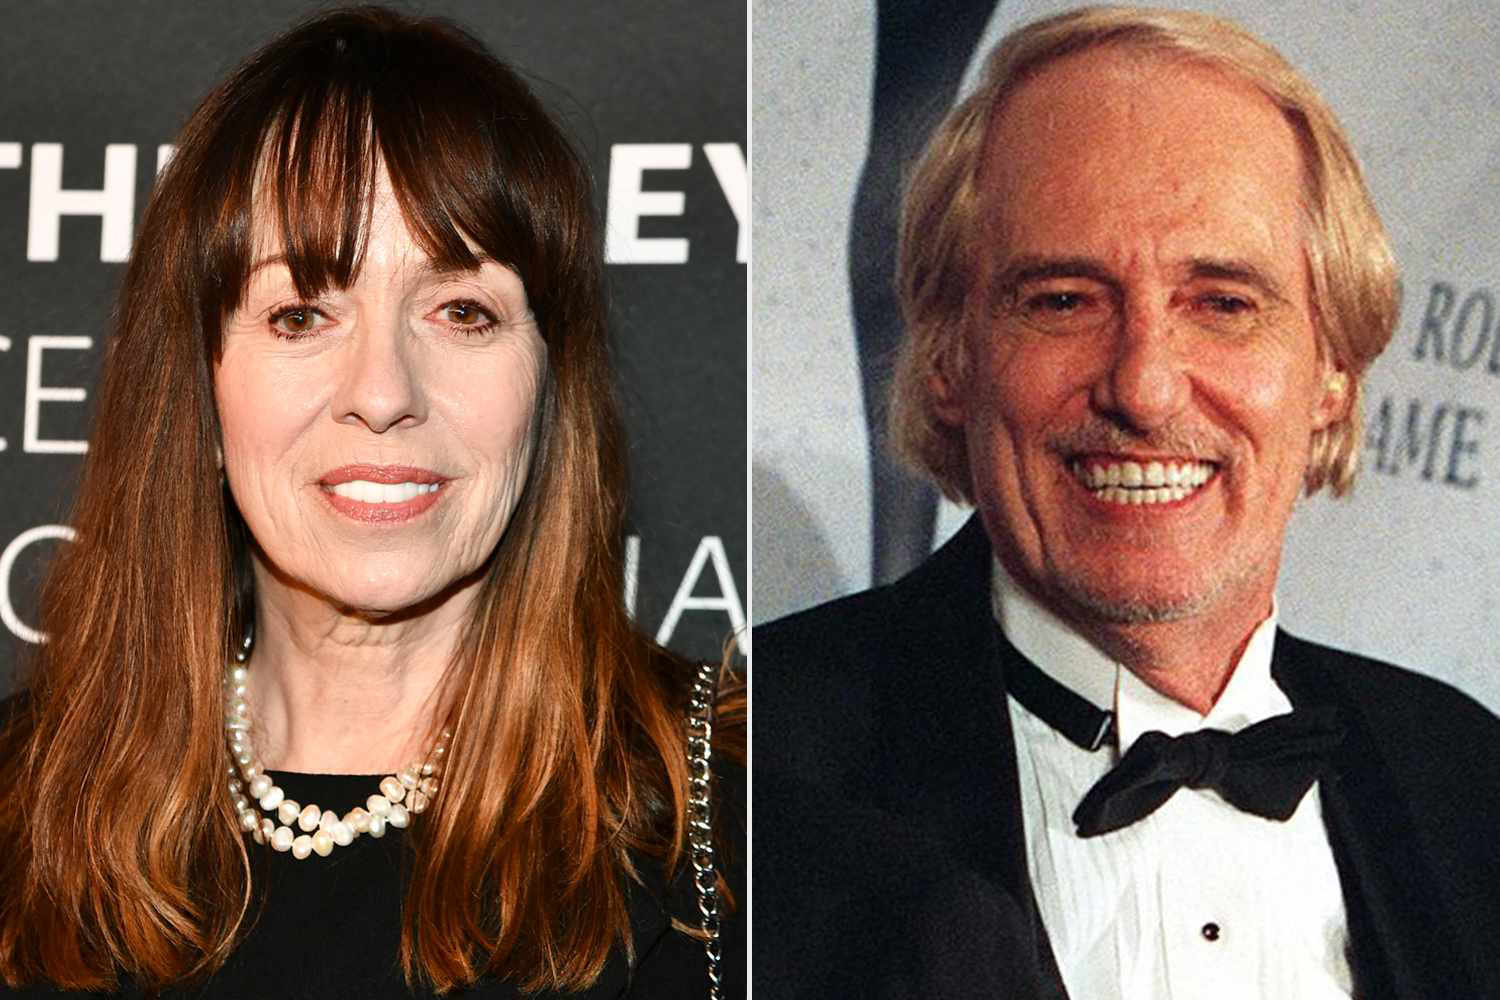 Mackenzie Phillips Tells Sister Chynna She Gets Trolled For Forgiving Their Dad As She Admits 